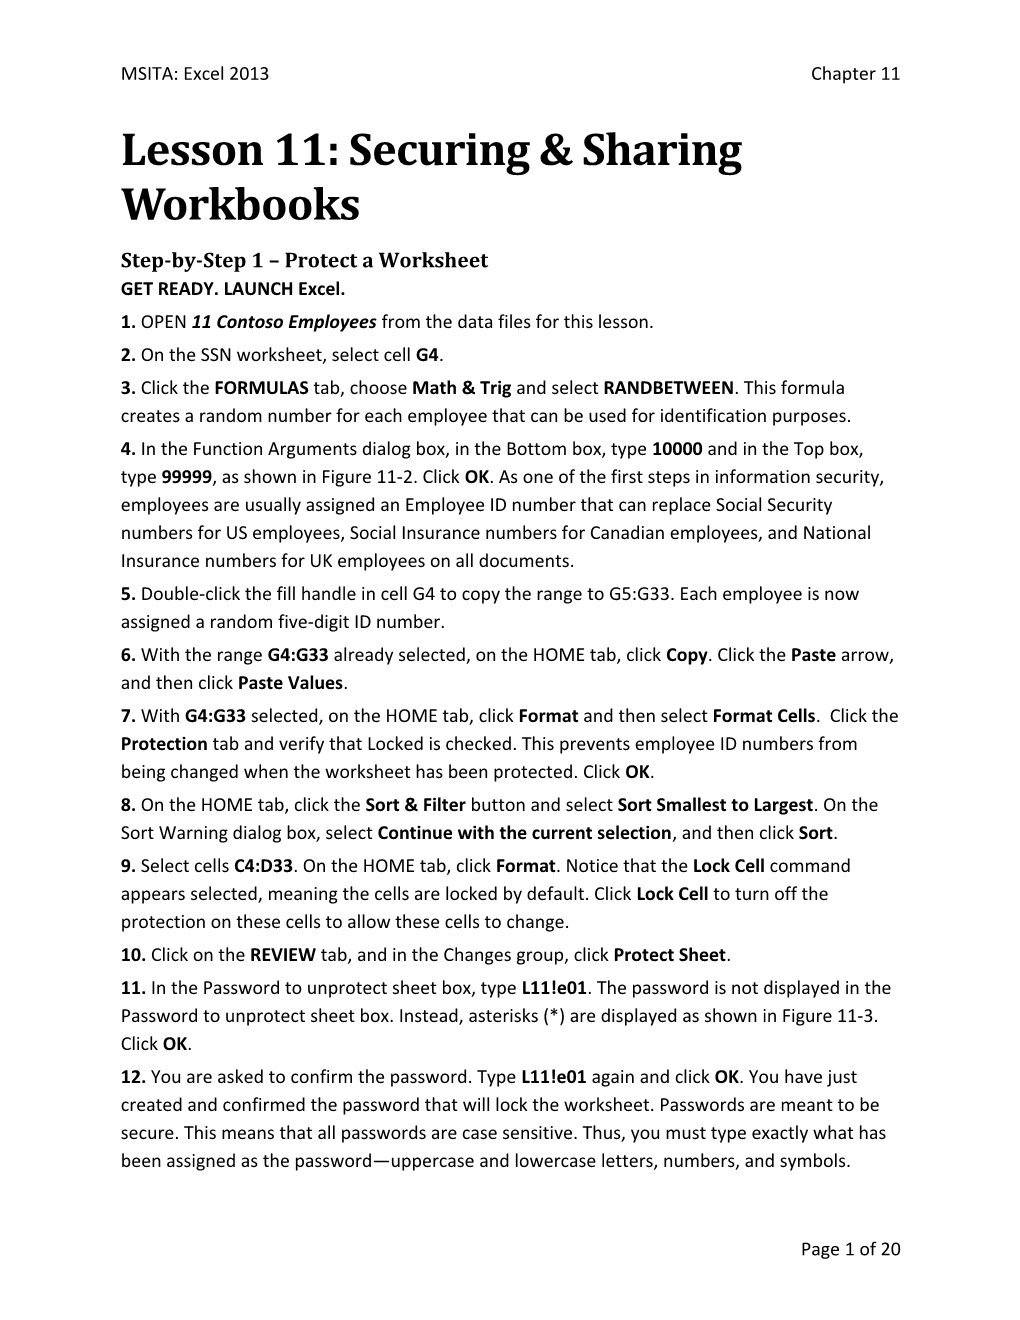 Step-By-Step 1 Protect a Worksheet